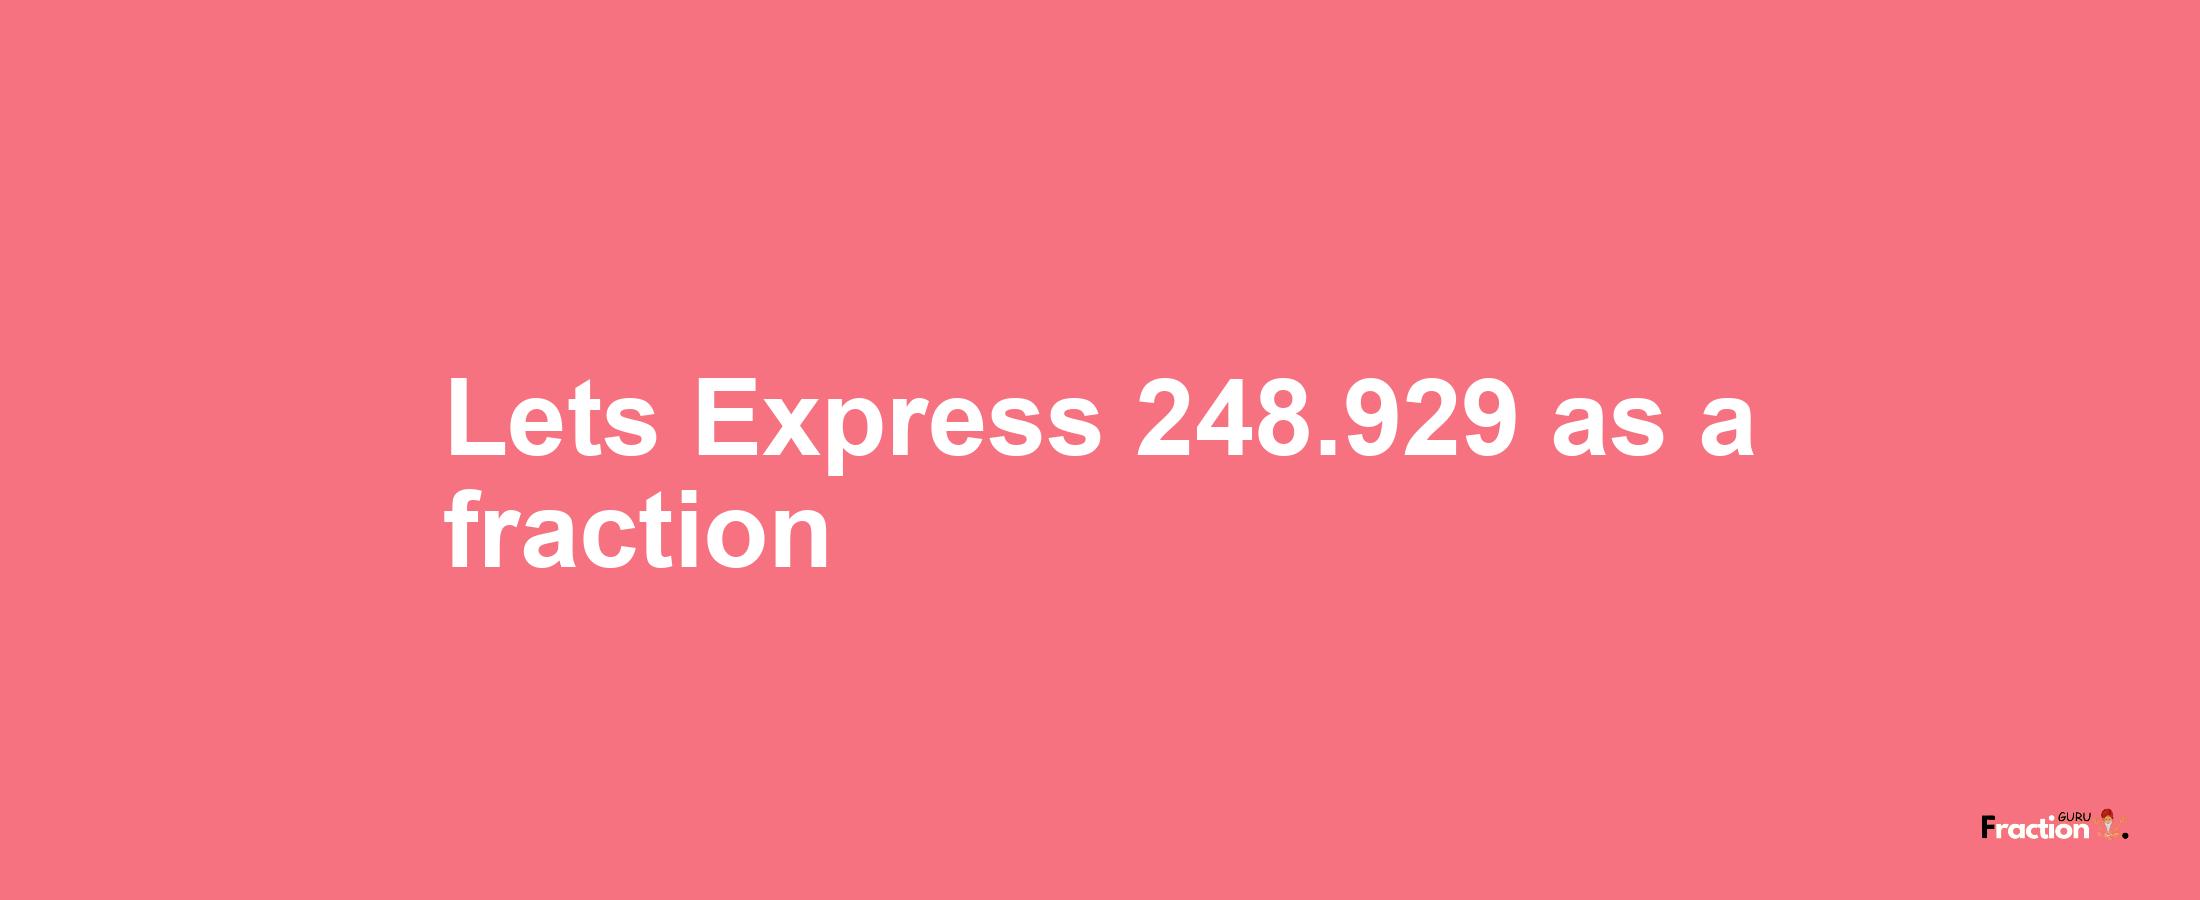 Lets Express 248.929 as afraction